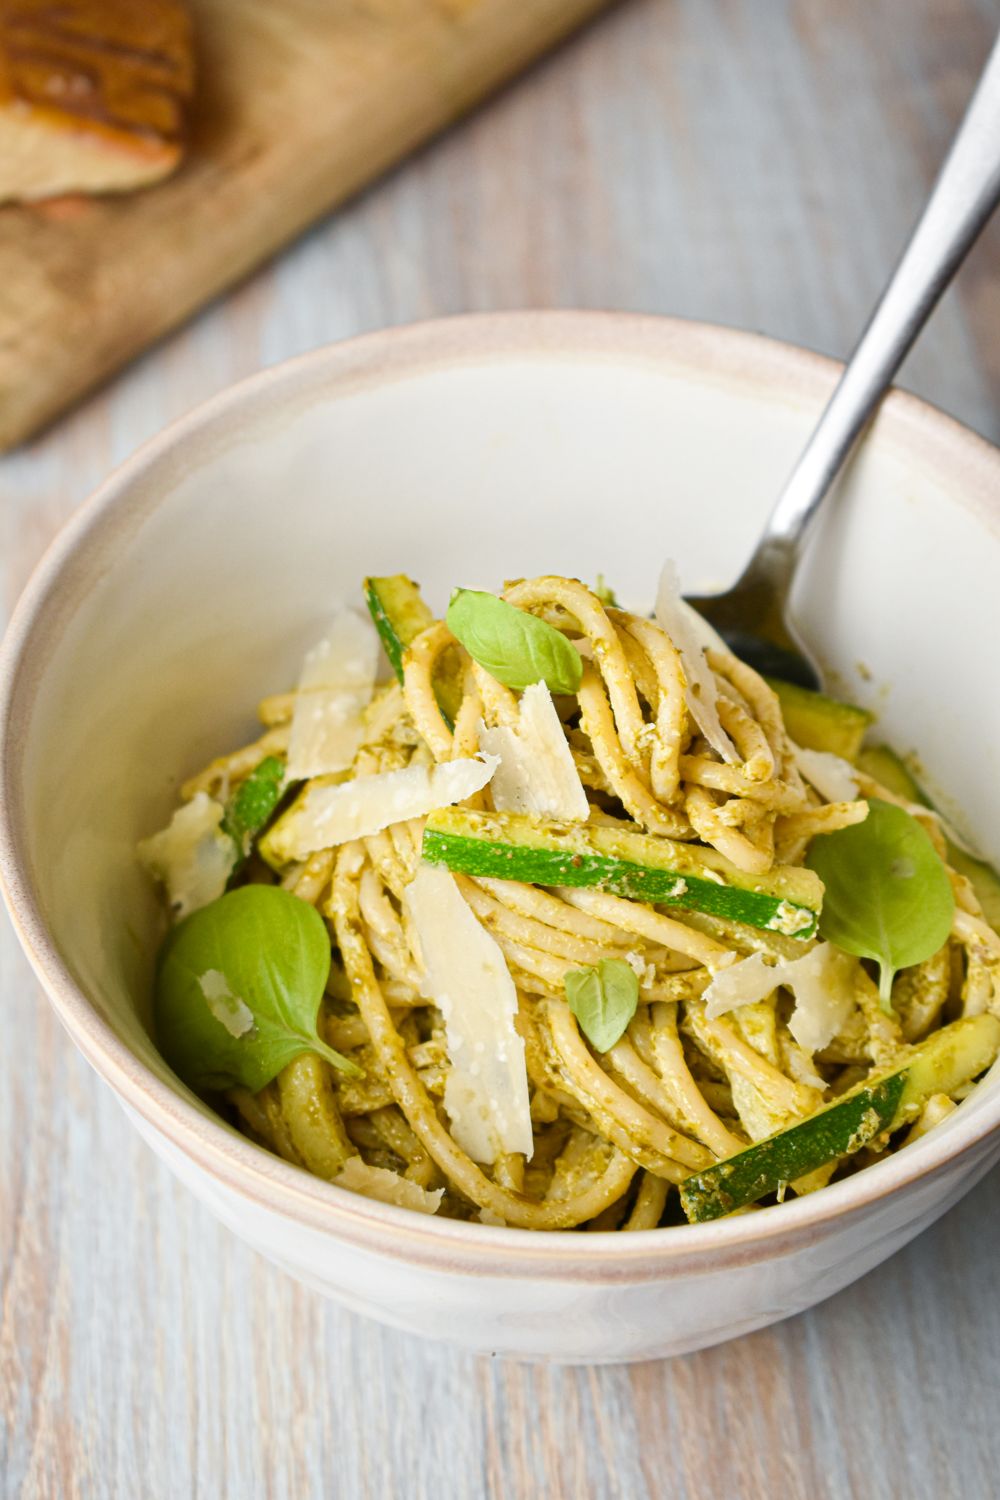 Pesto pasta with zucchini and fresh Parmesan cheese in a bowl with a fork.